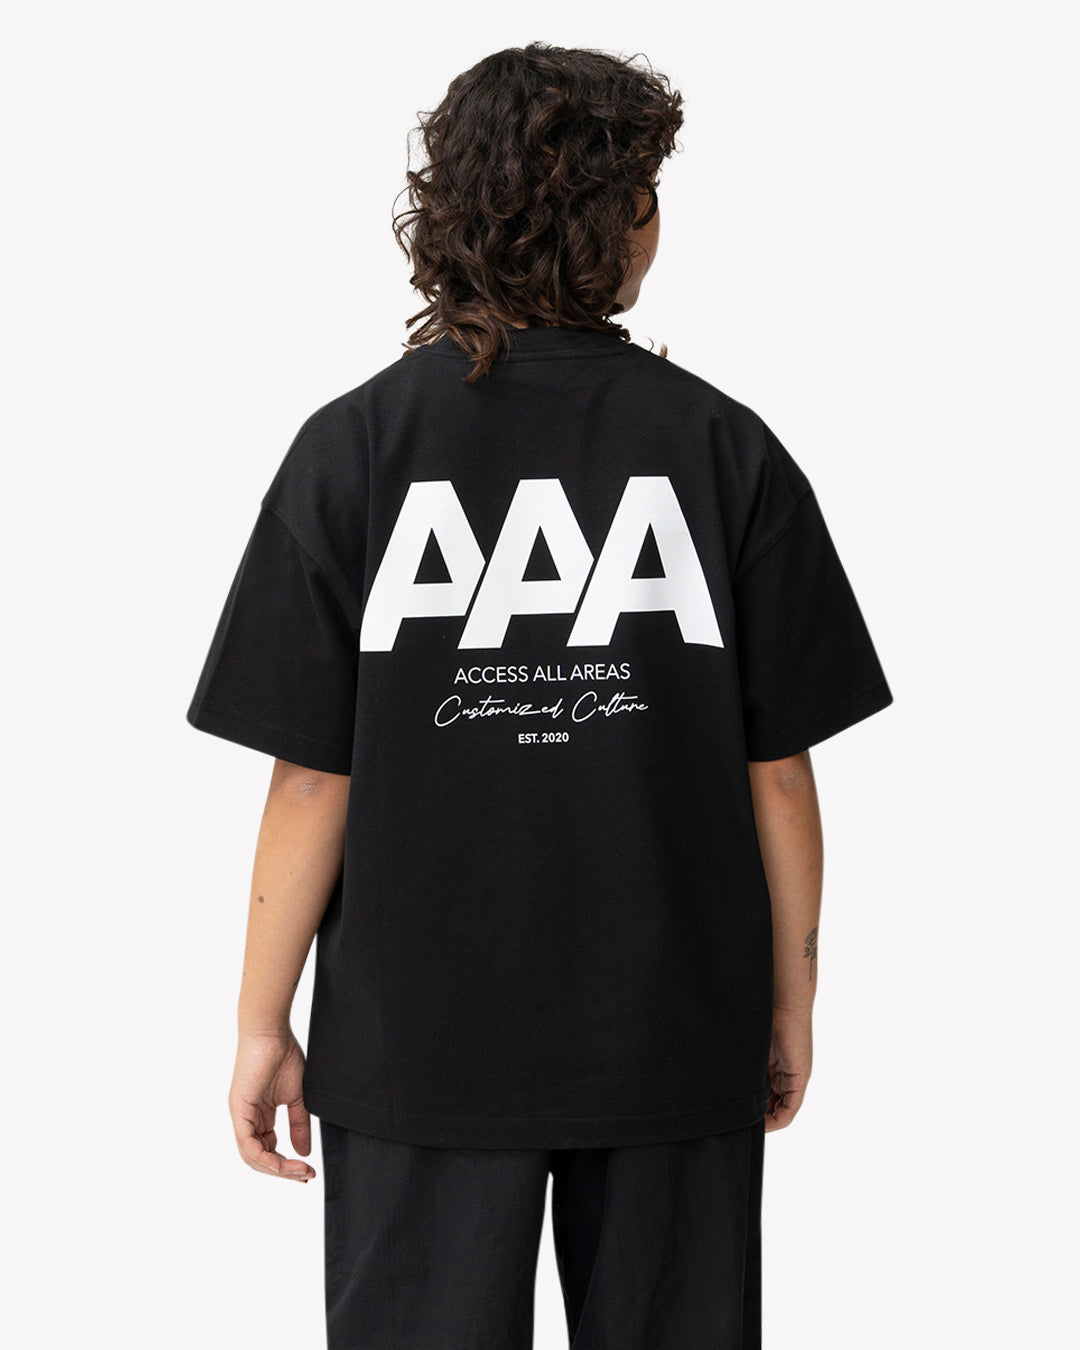 Access All Areas T-Shirt Black | Customized Culture